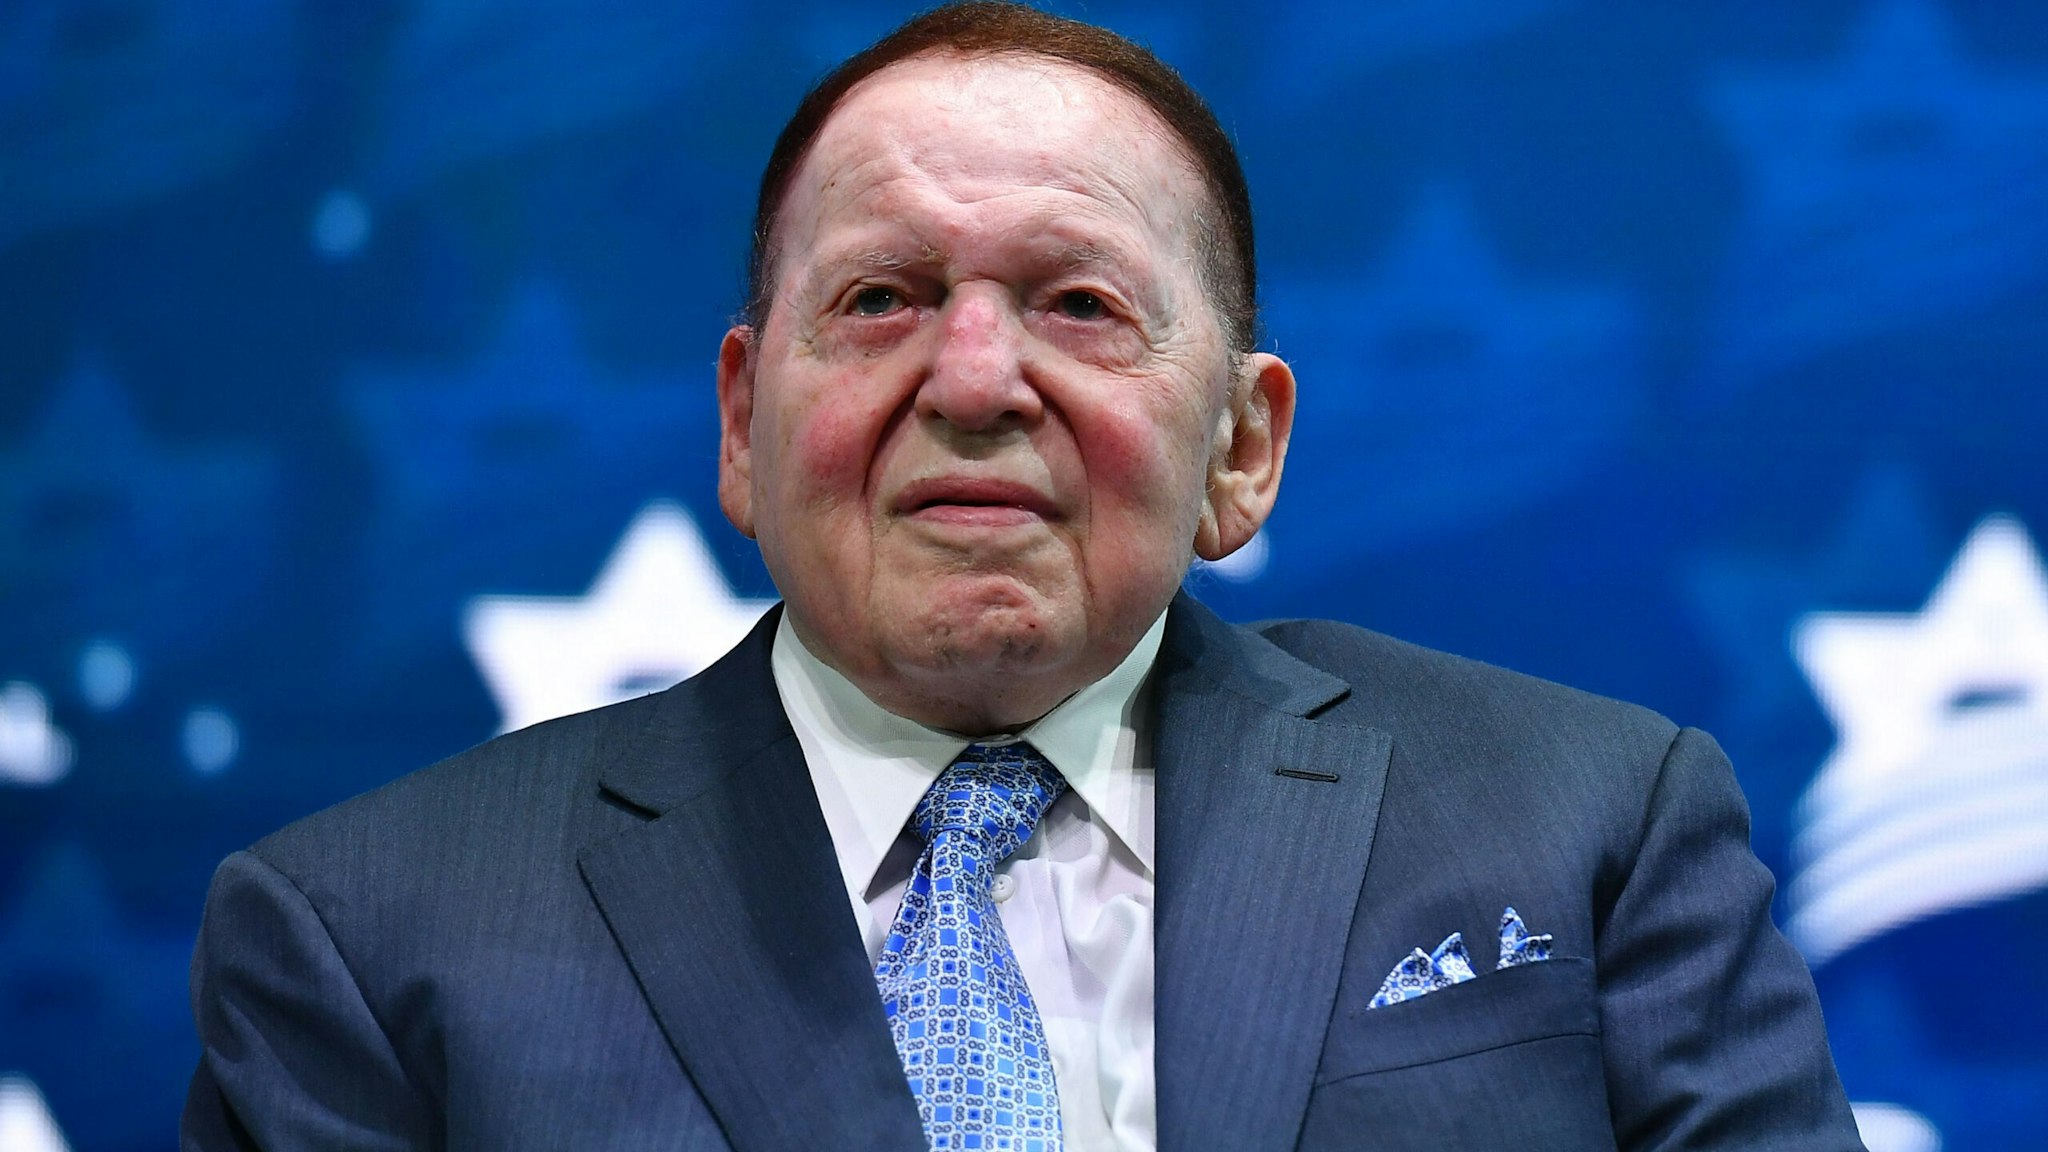 Philanthropist Chief Executive Officer of Las Vegas Sands Sheldon Adelson listens to US President Donald Trump address to the Israeli American Council National Summit 2019 at the Diplomat Beach Resort in Hollywood, Florida on December 7, 2019.